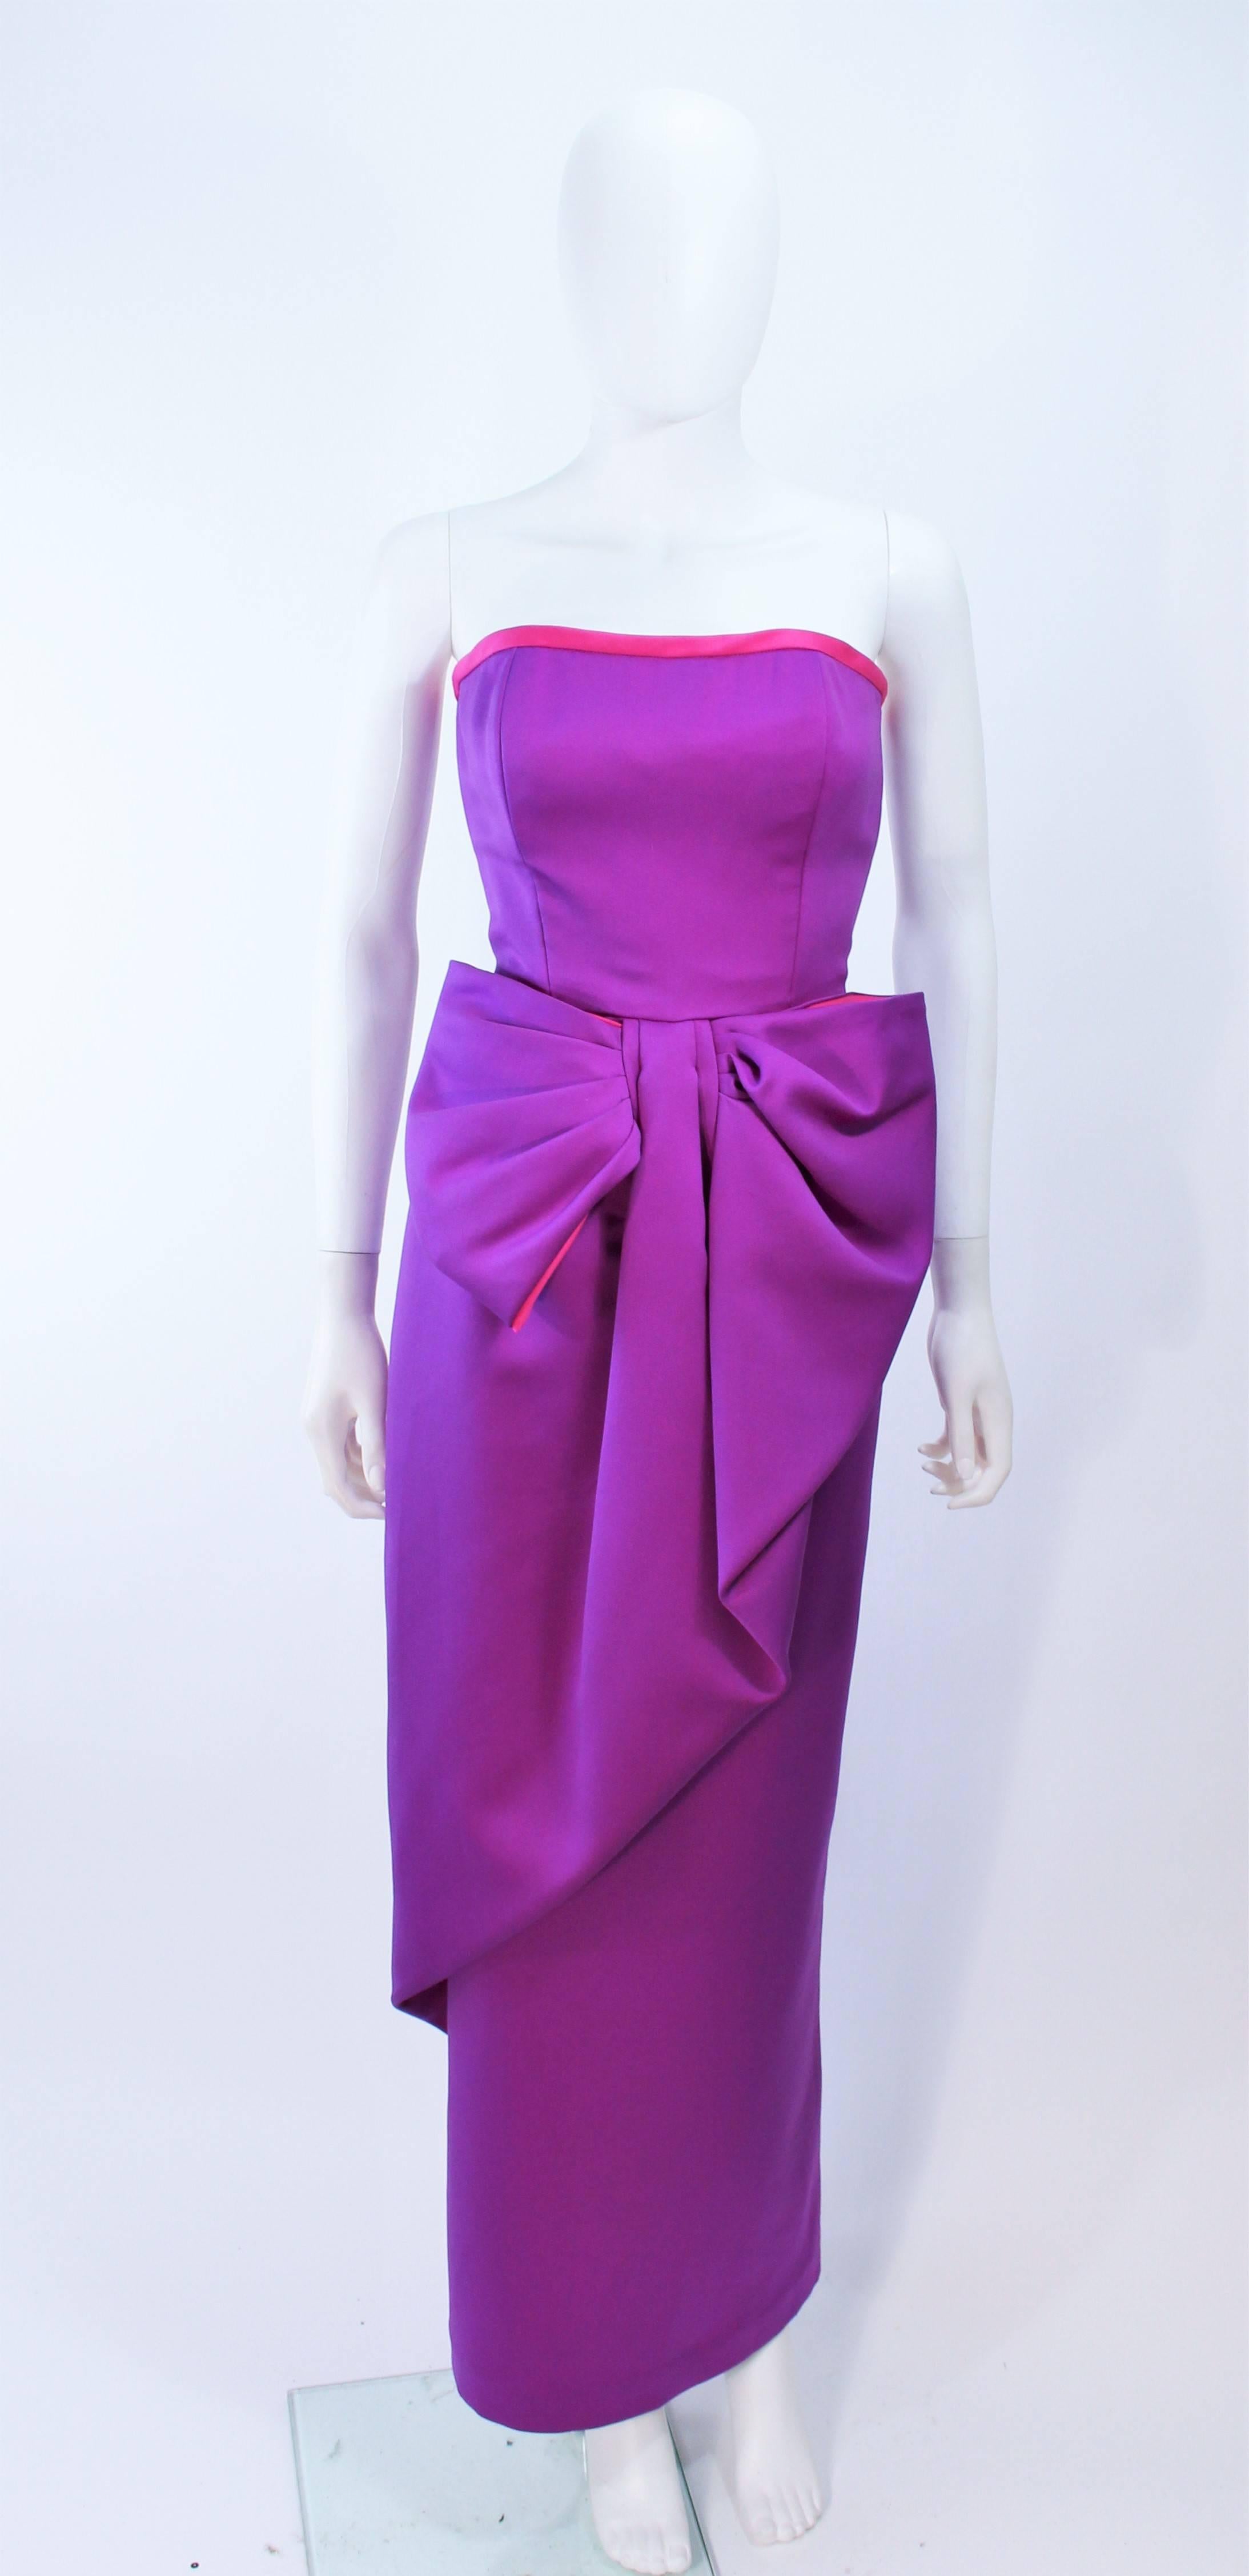 This Victor Costa gown is composed of a purple and magenta combination. Features a front draped bow at the waist. There is a center back zipper closure. In excellent vintage condition.

**Please cross-reference measurements for personal accuracy.